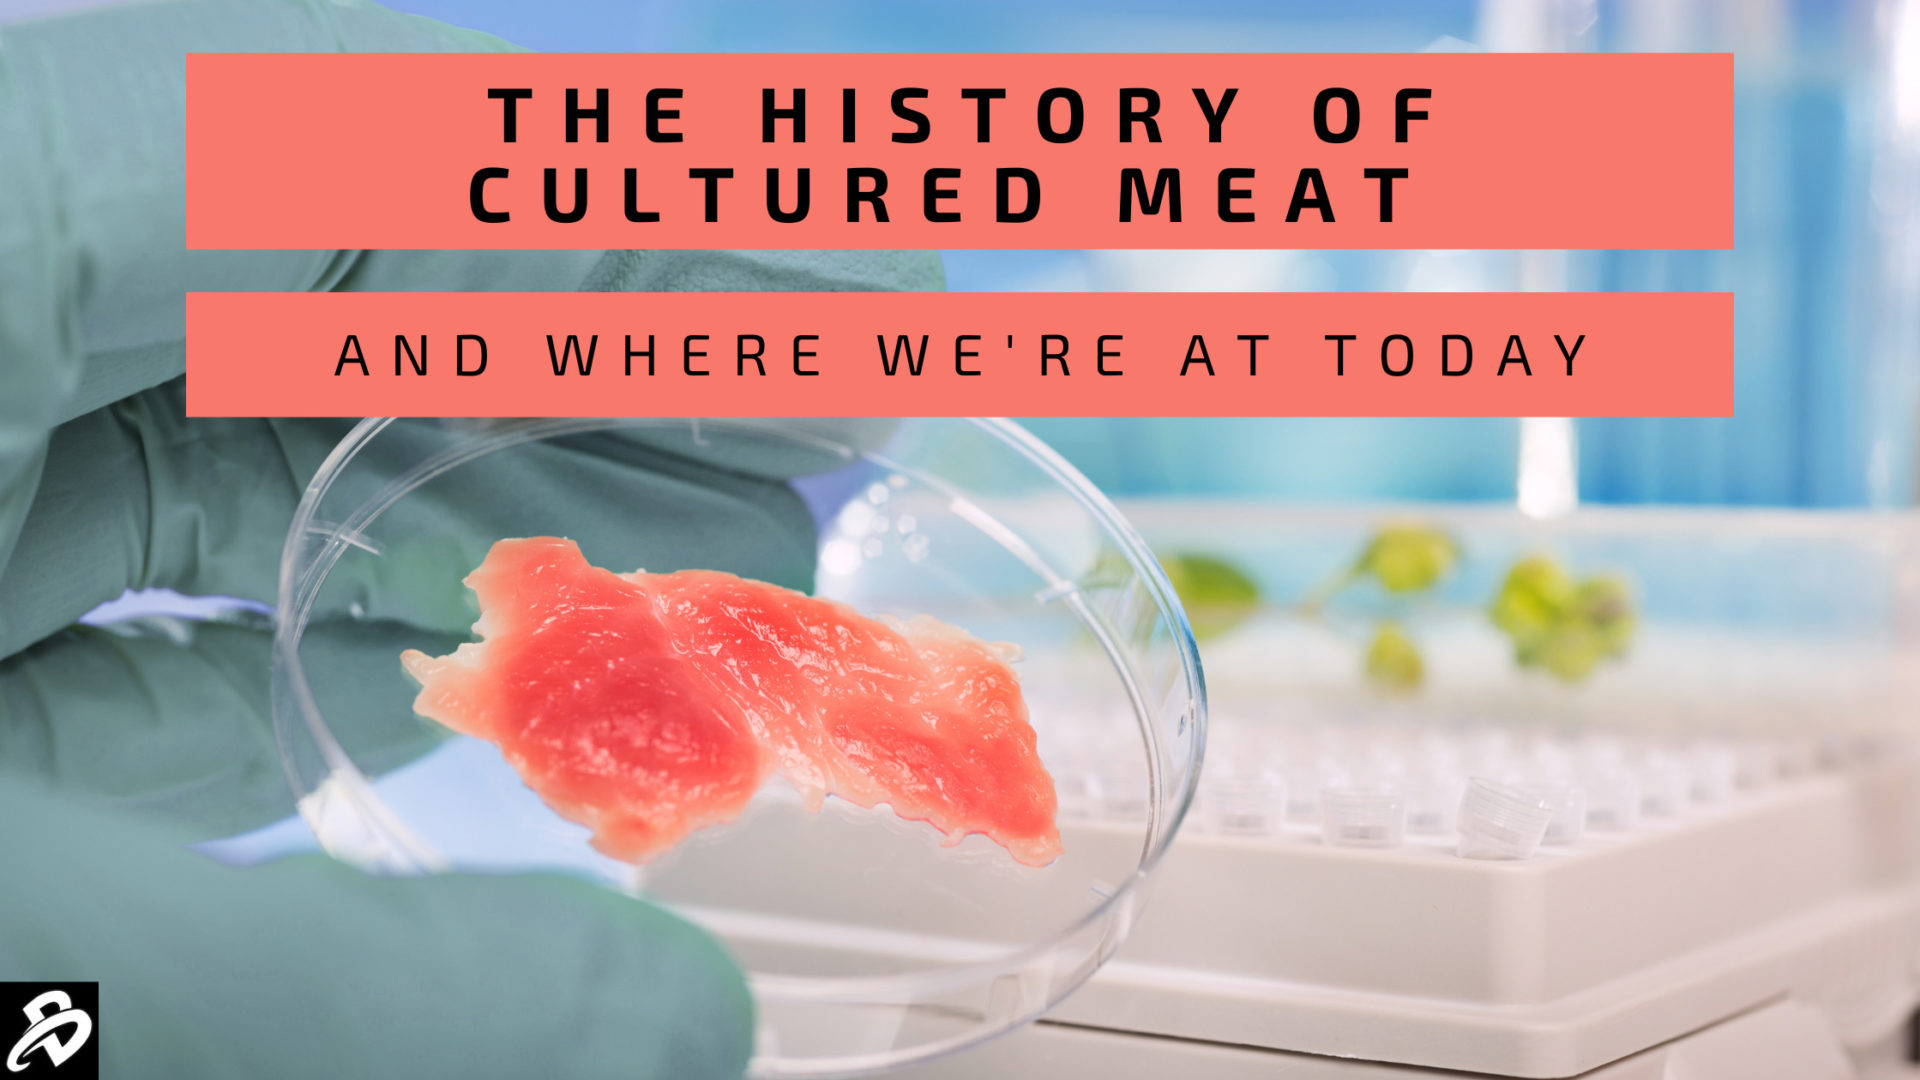 The History of Cultured Meat